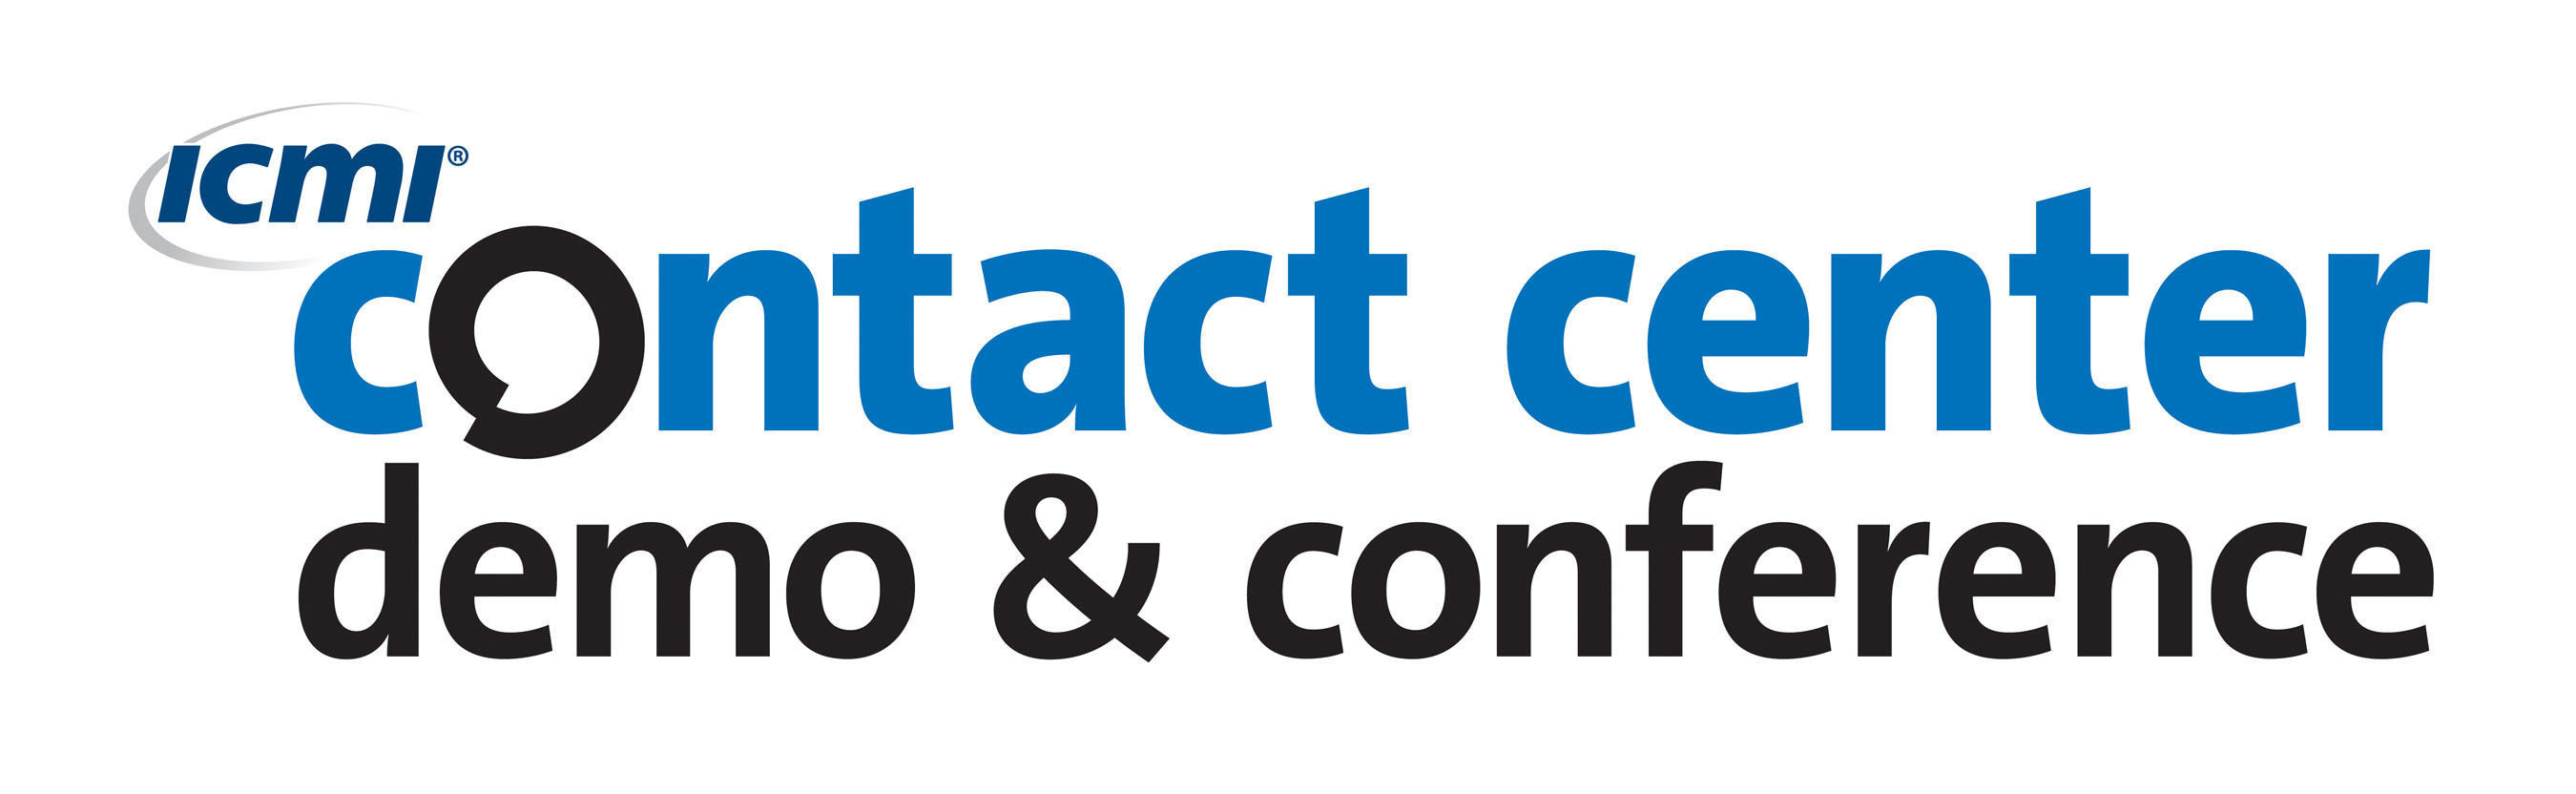 The 2015 Contact Center Demo & Conference will take place October 19-21 at the Rio in Las Vegas.